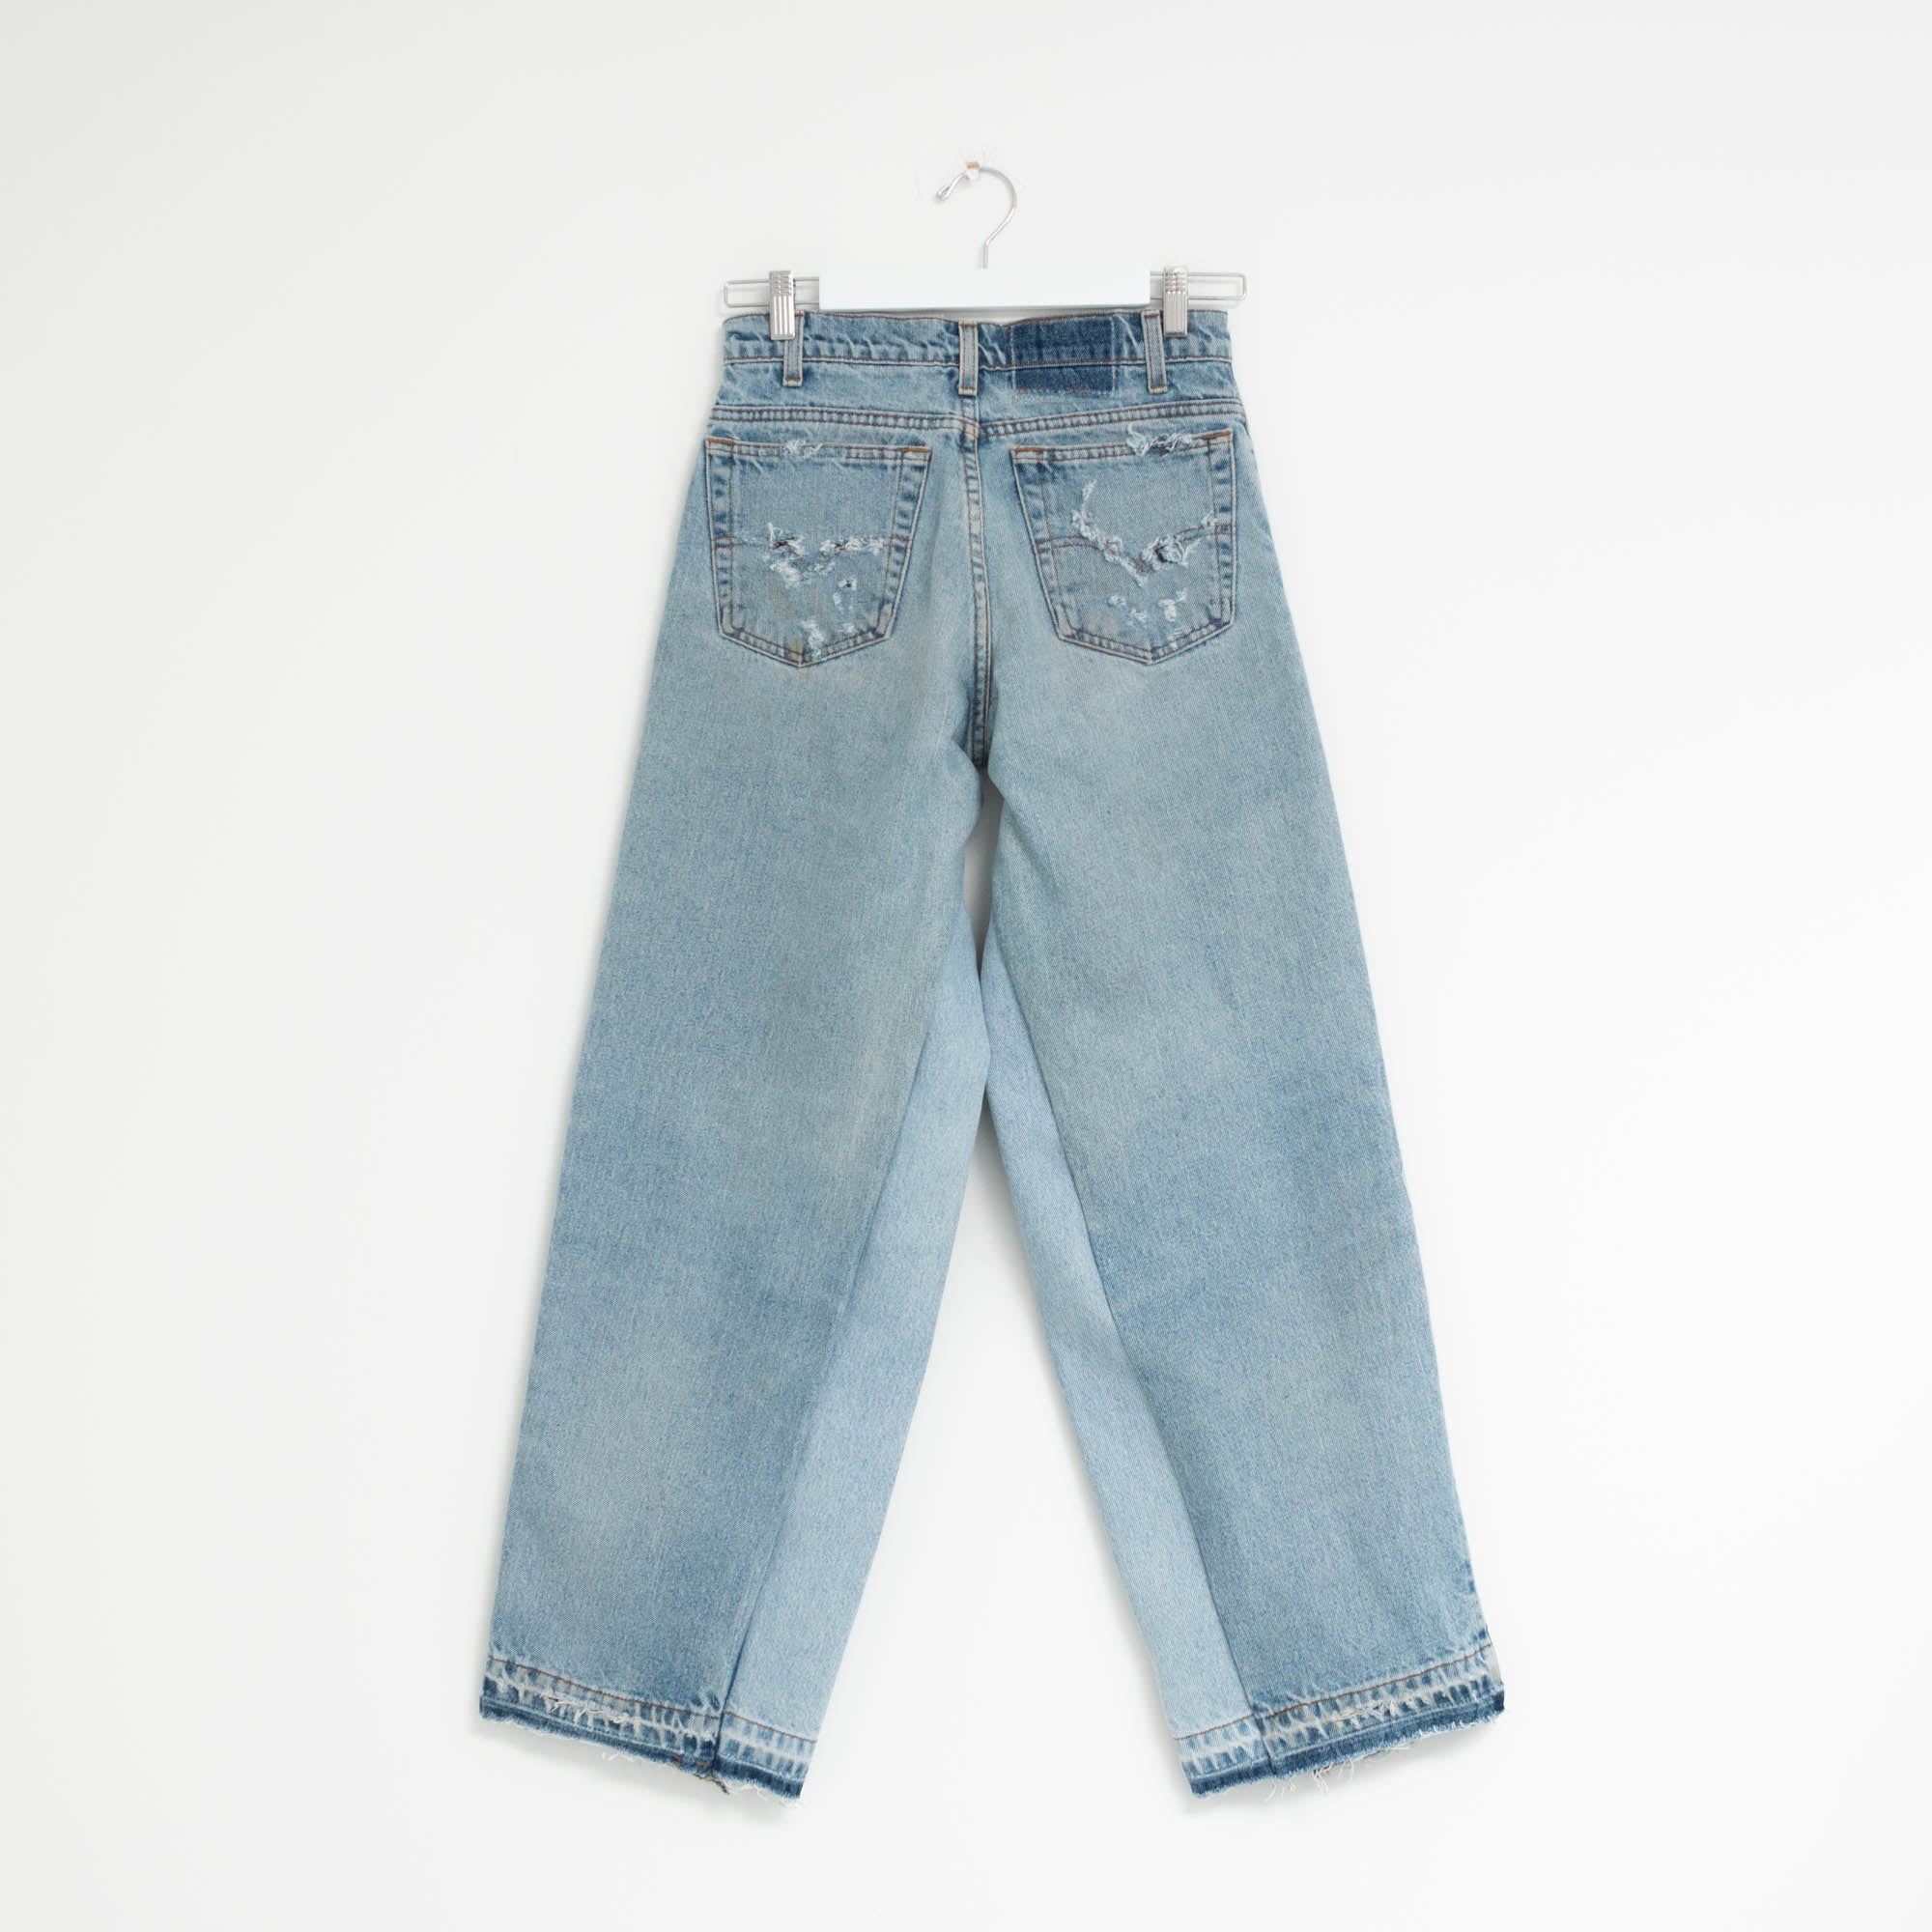 “FLARE” Jeans W28 L30